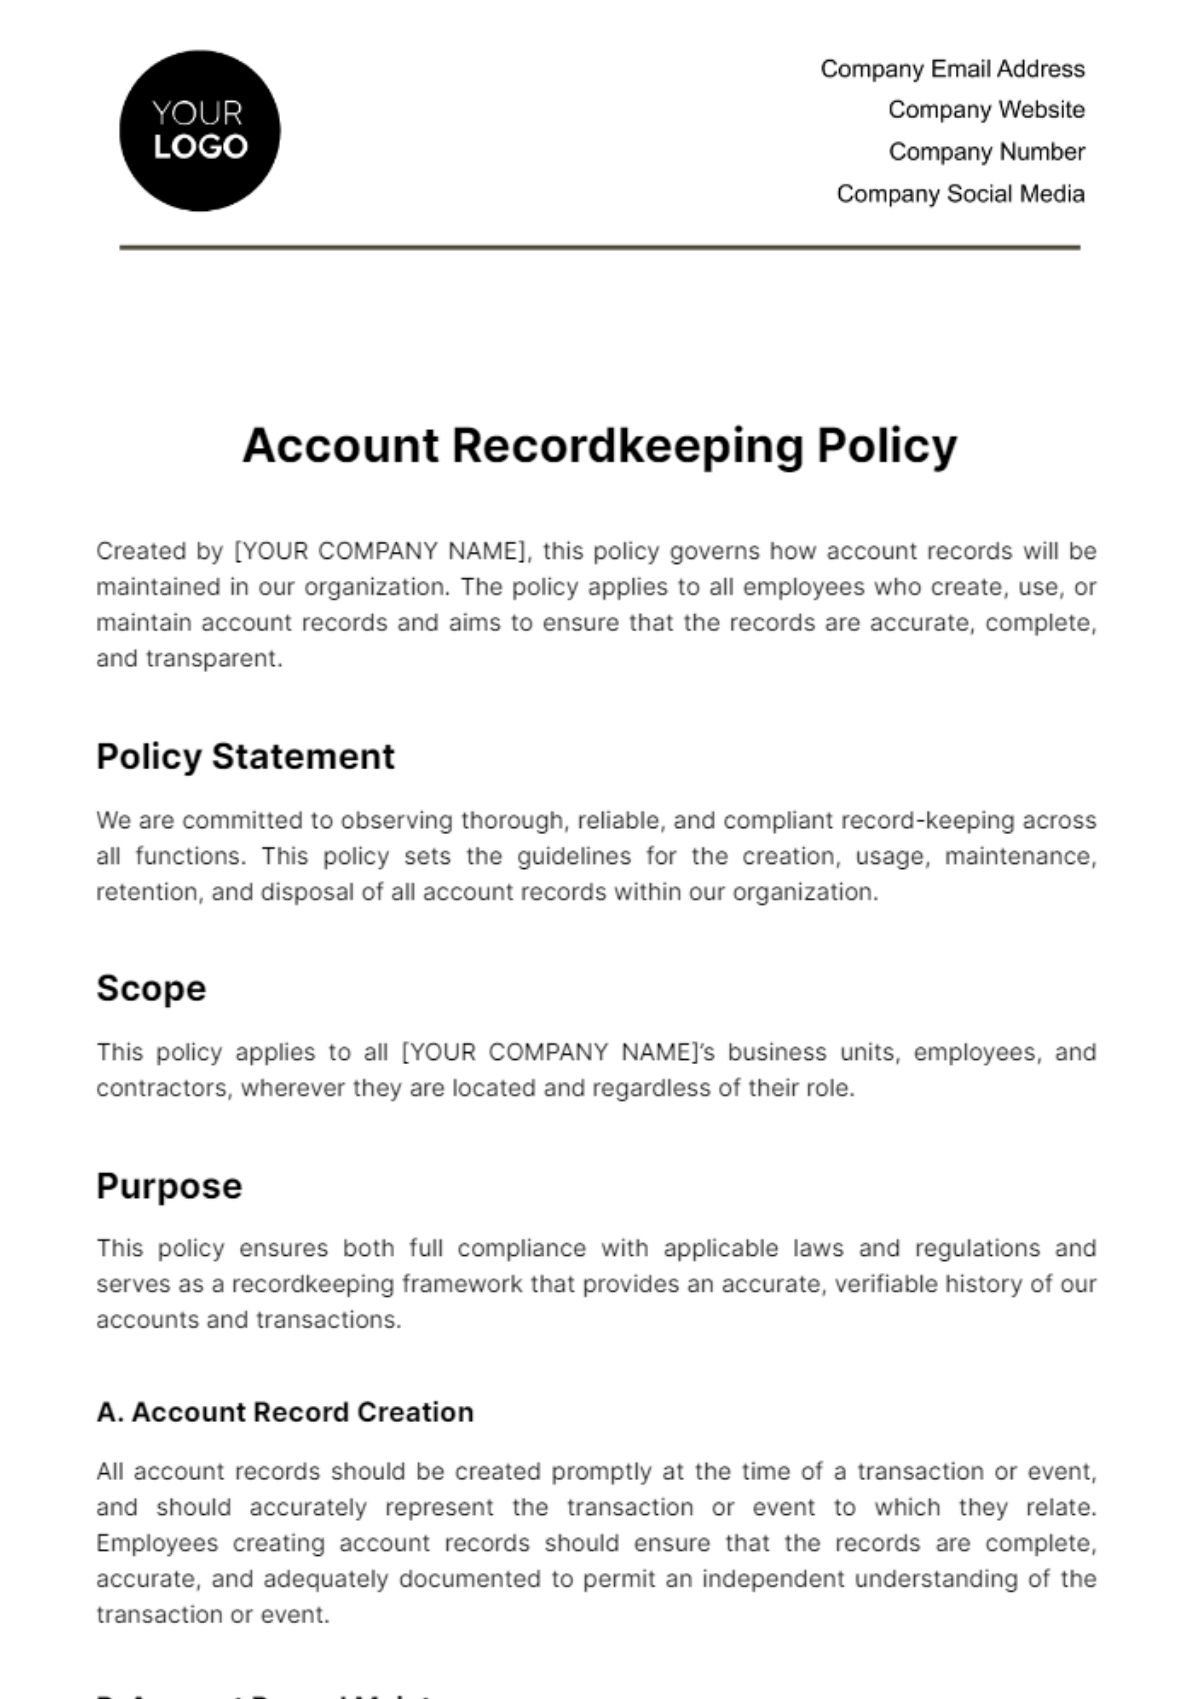 Free Account Recordkeeping Policy Template